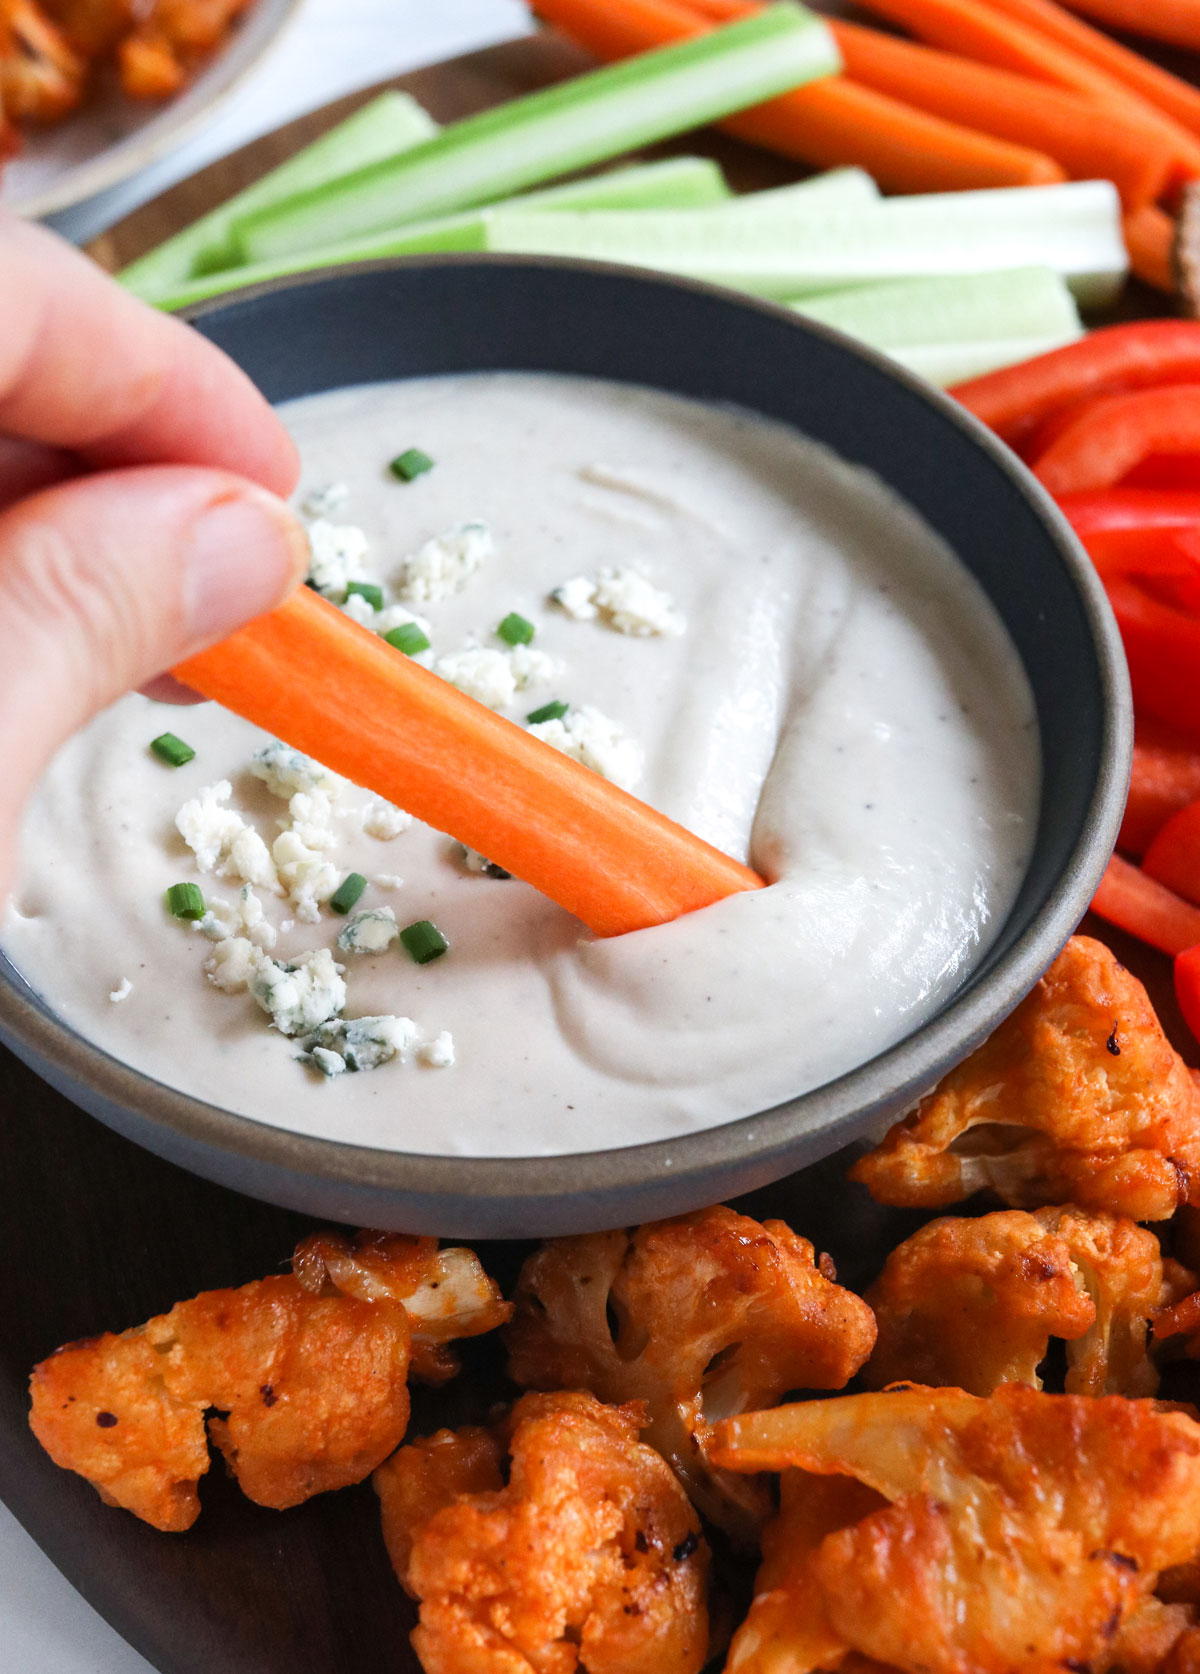 carrot dipped into a bowl of healthy blue cheese dressing.